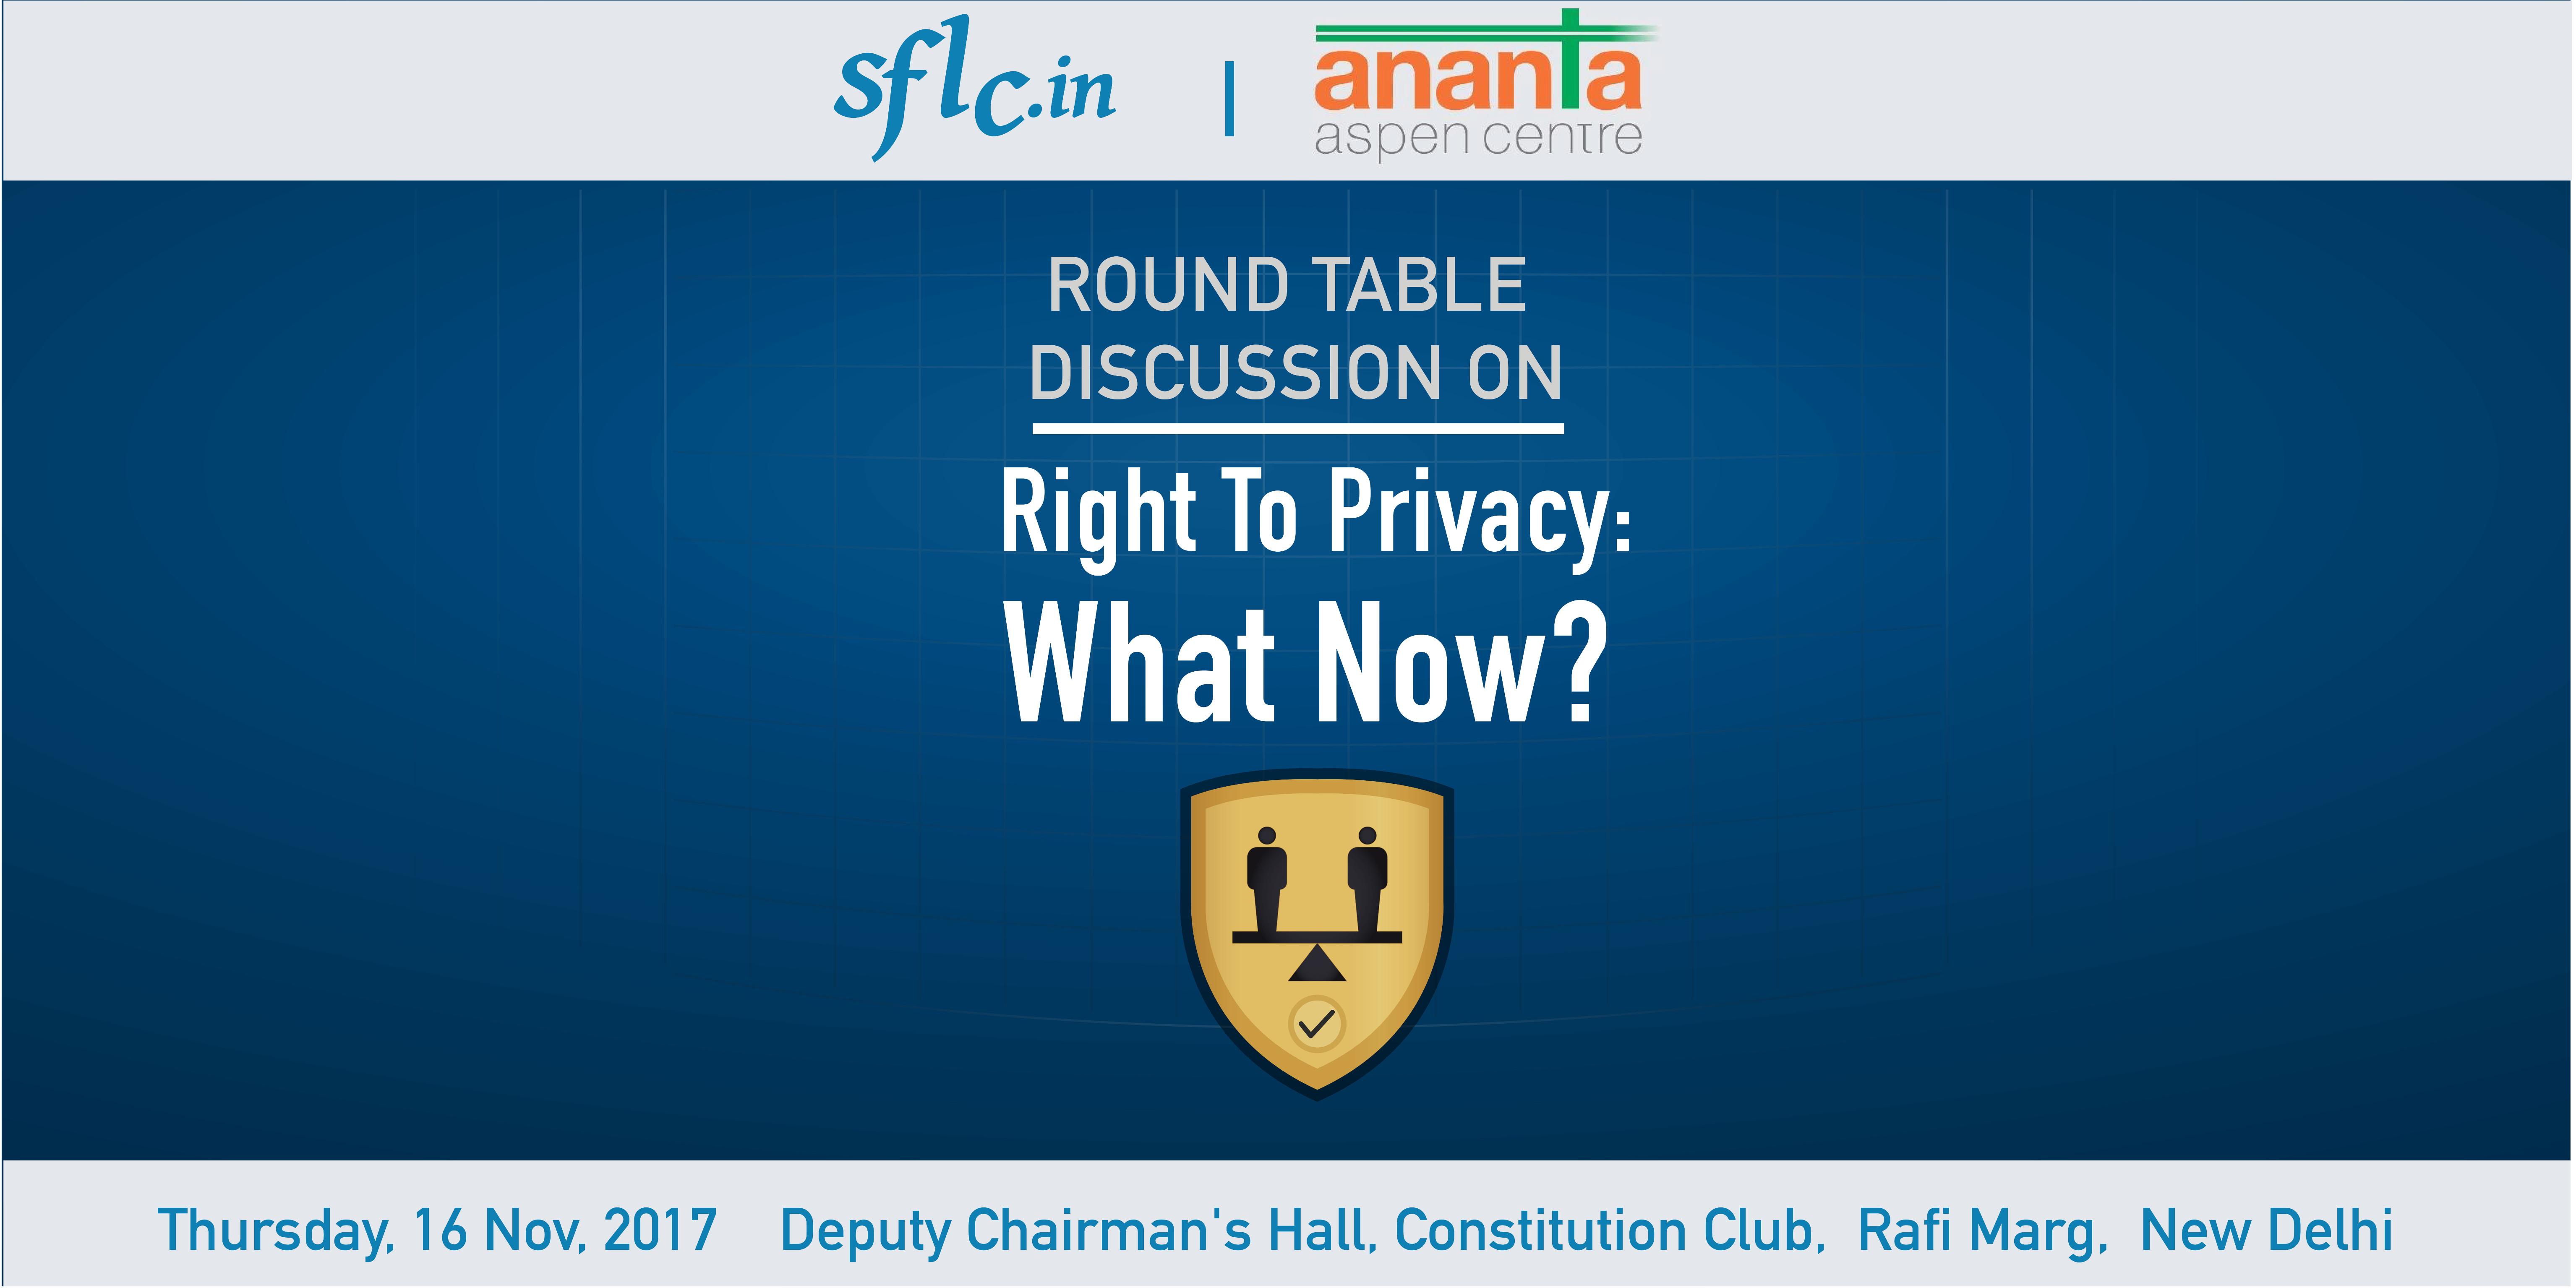 Round Table: “Right to Privacy: What now?” on 16th November 2017